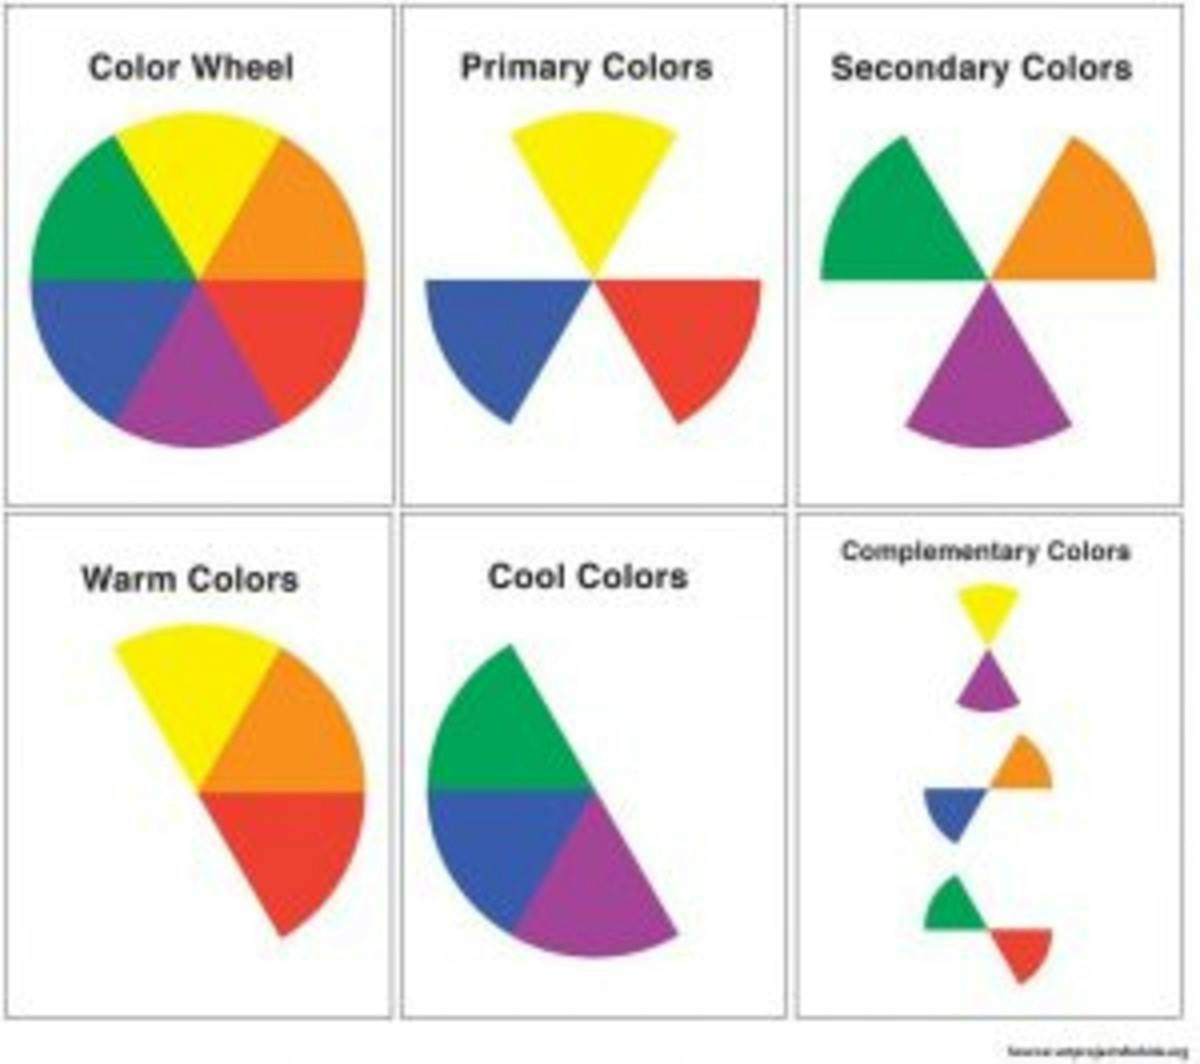  Color wheel and basic colors